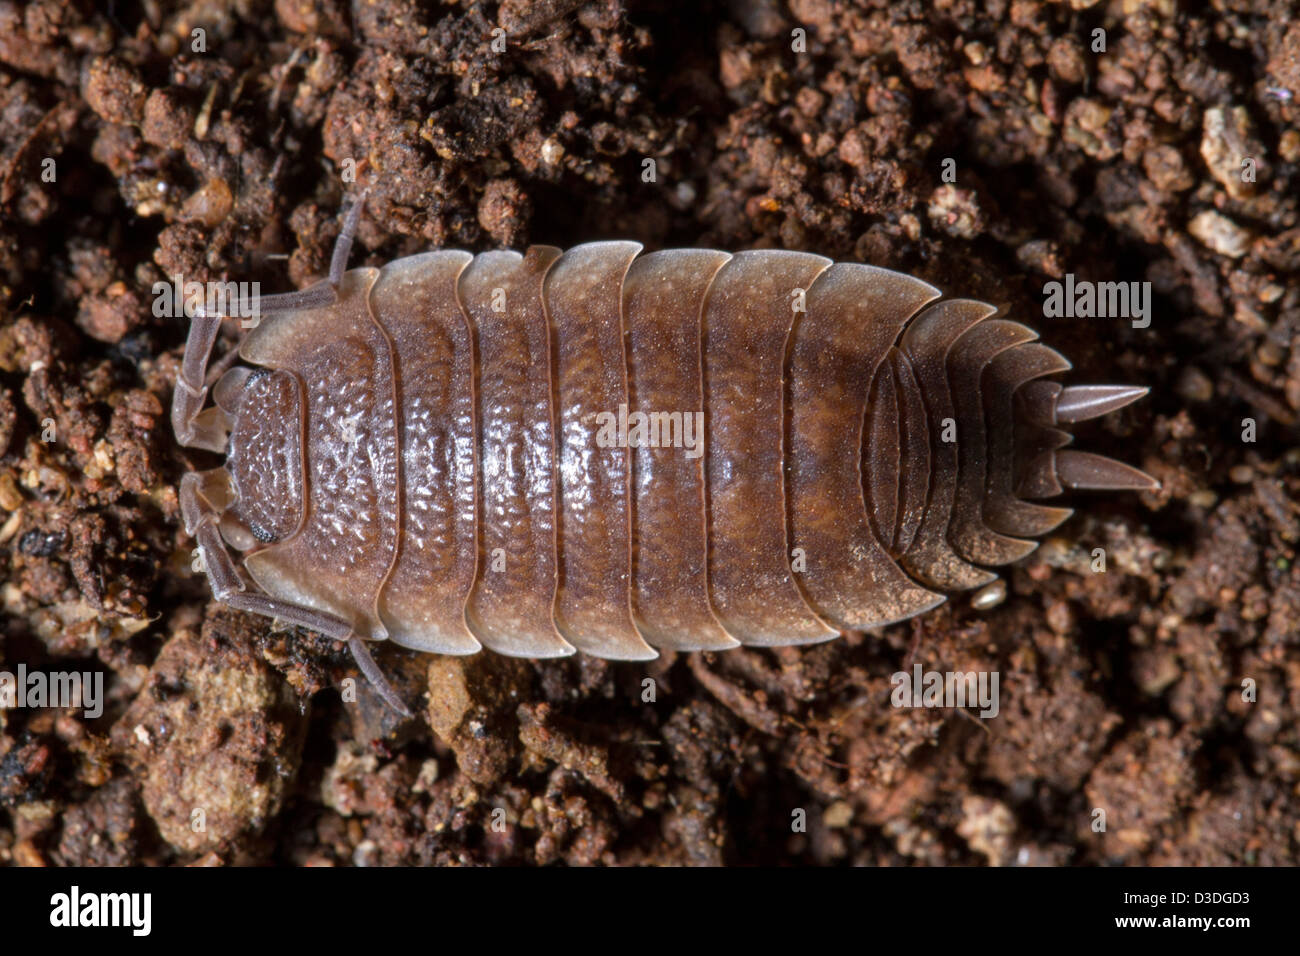 Close up view of a pillbug on the dirt. Stock Photo